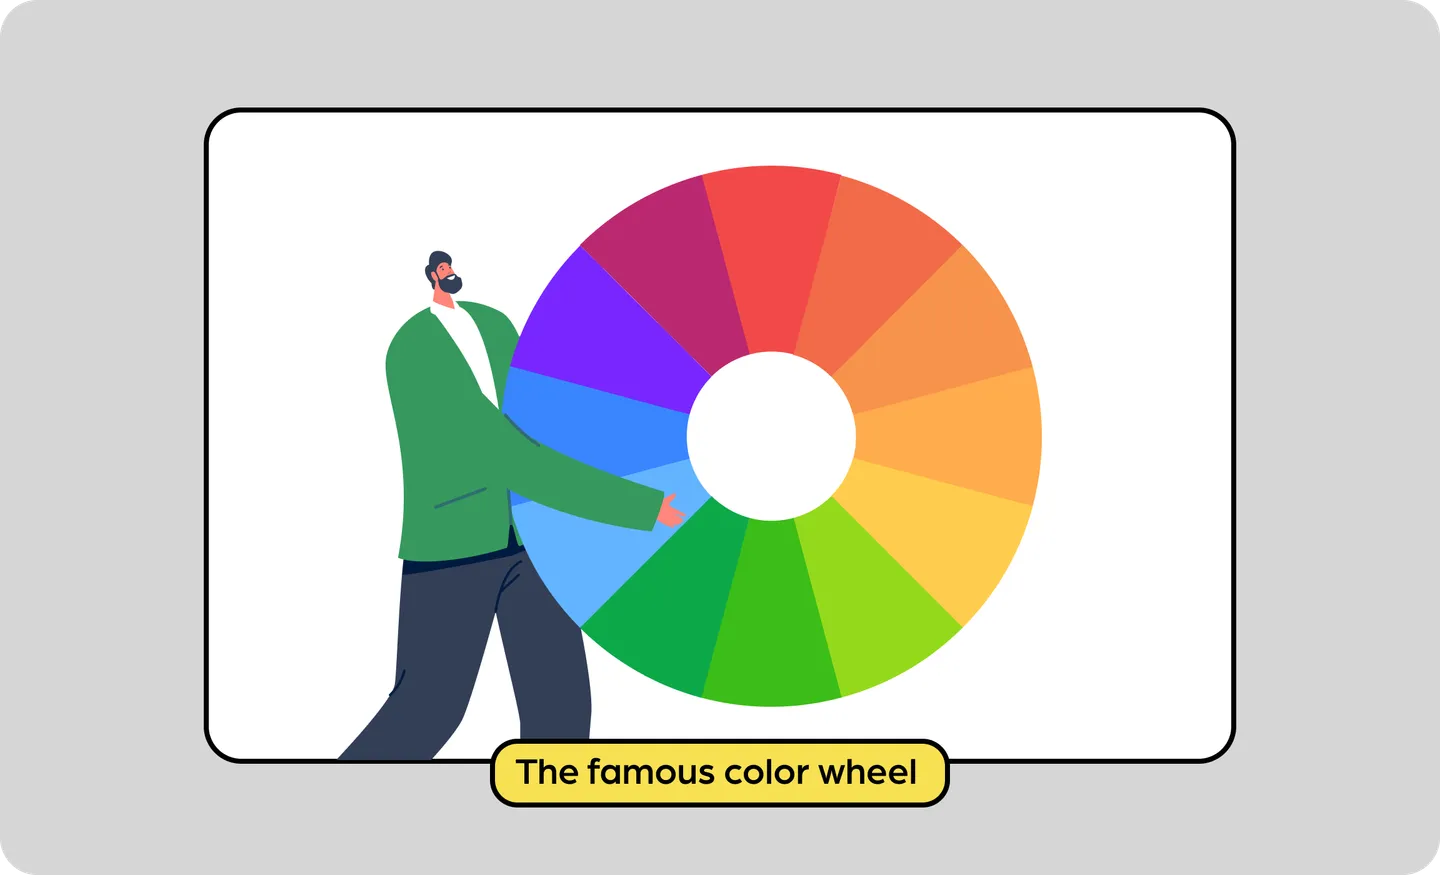 color wheel and color theory